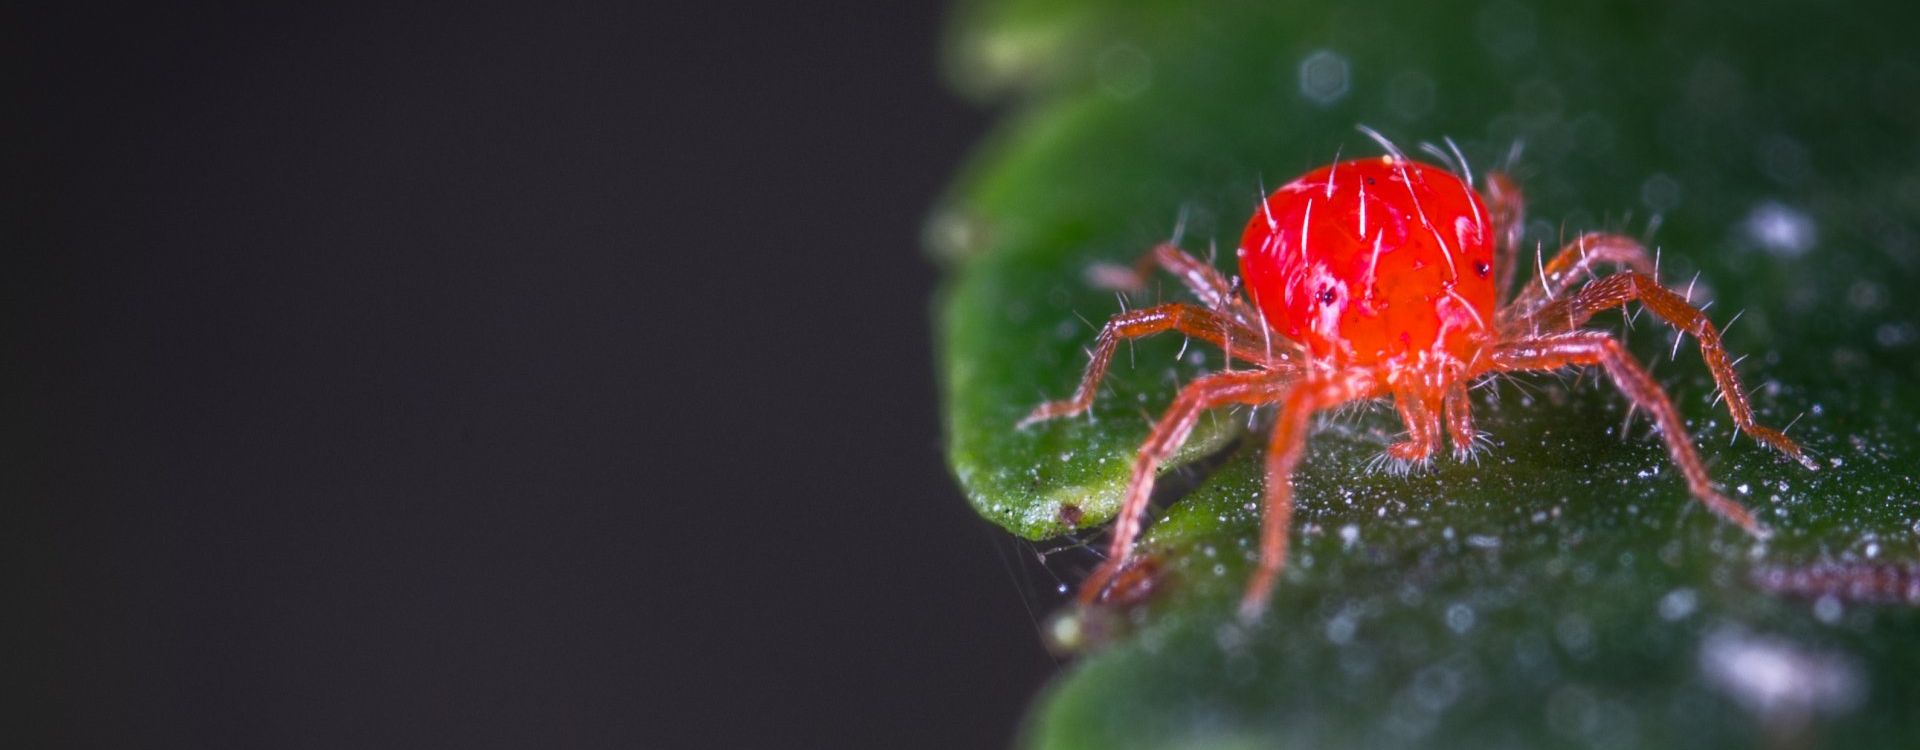 A red spider is sitting on a green leaf in the Treasure Valley.